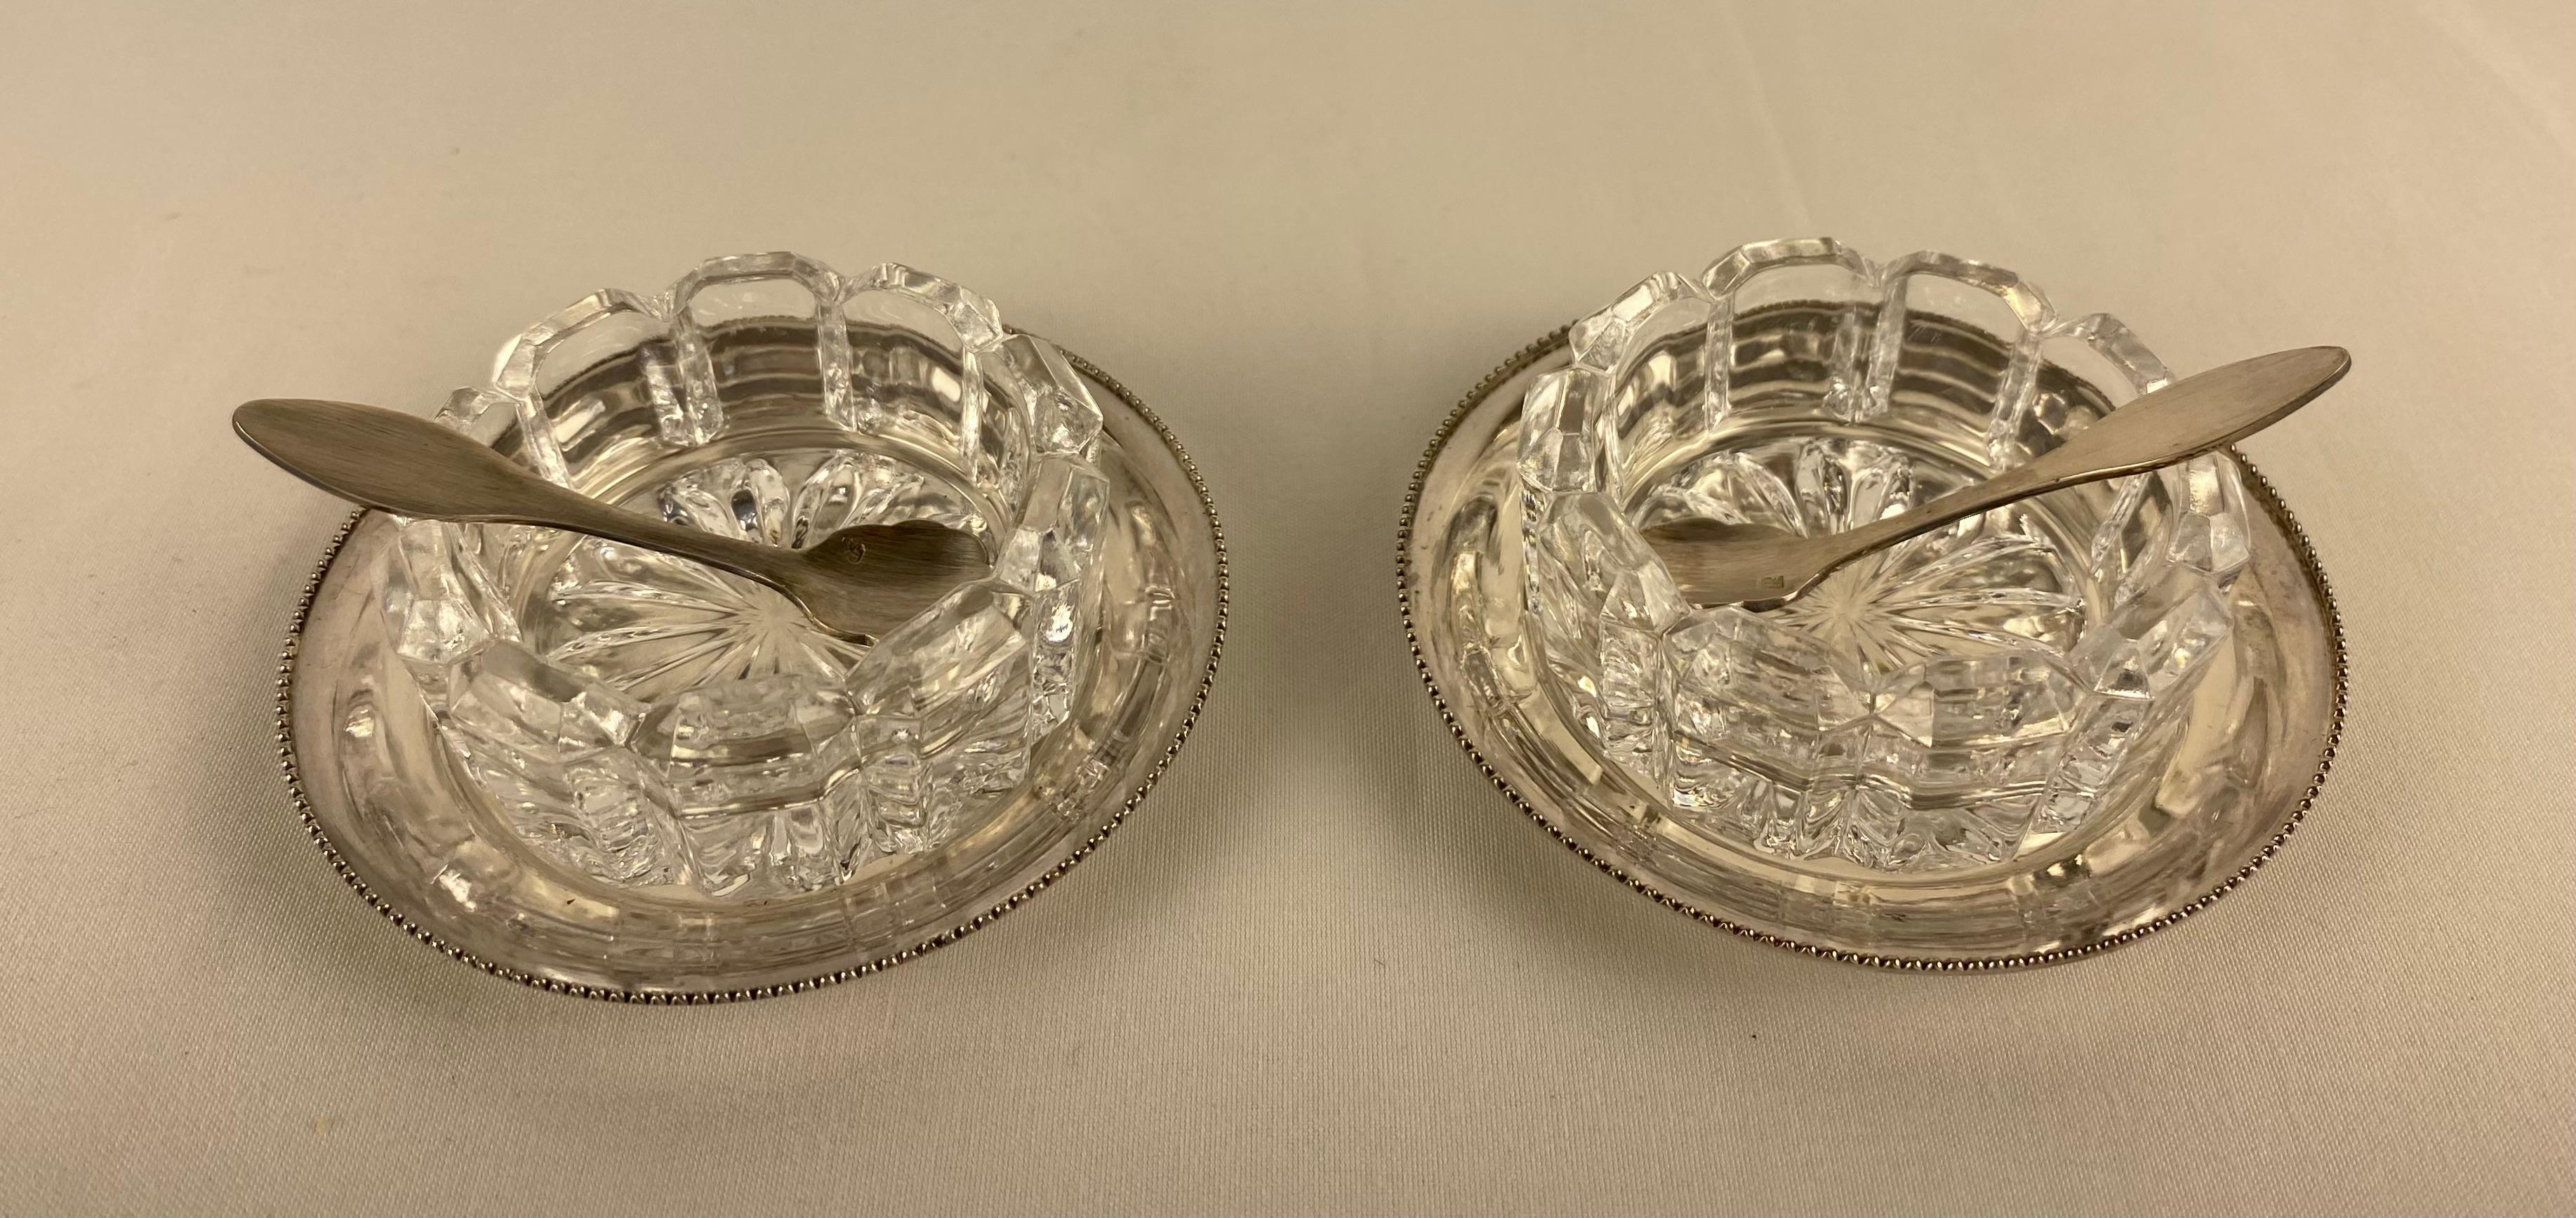 20th Century Set of 2 Crystal Salt and Pepper or Caviar Serving Dishes by Saglier France For Sale